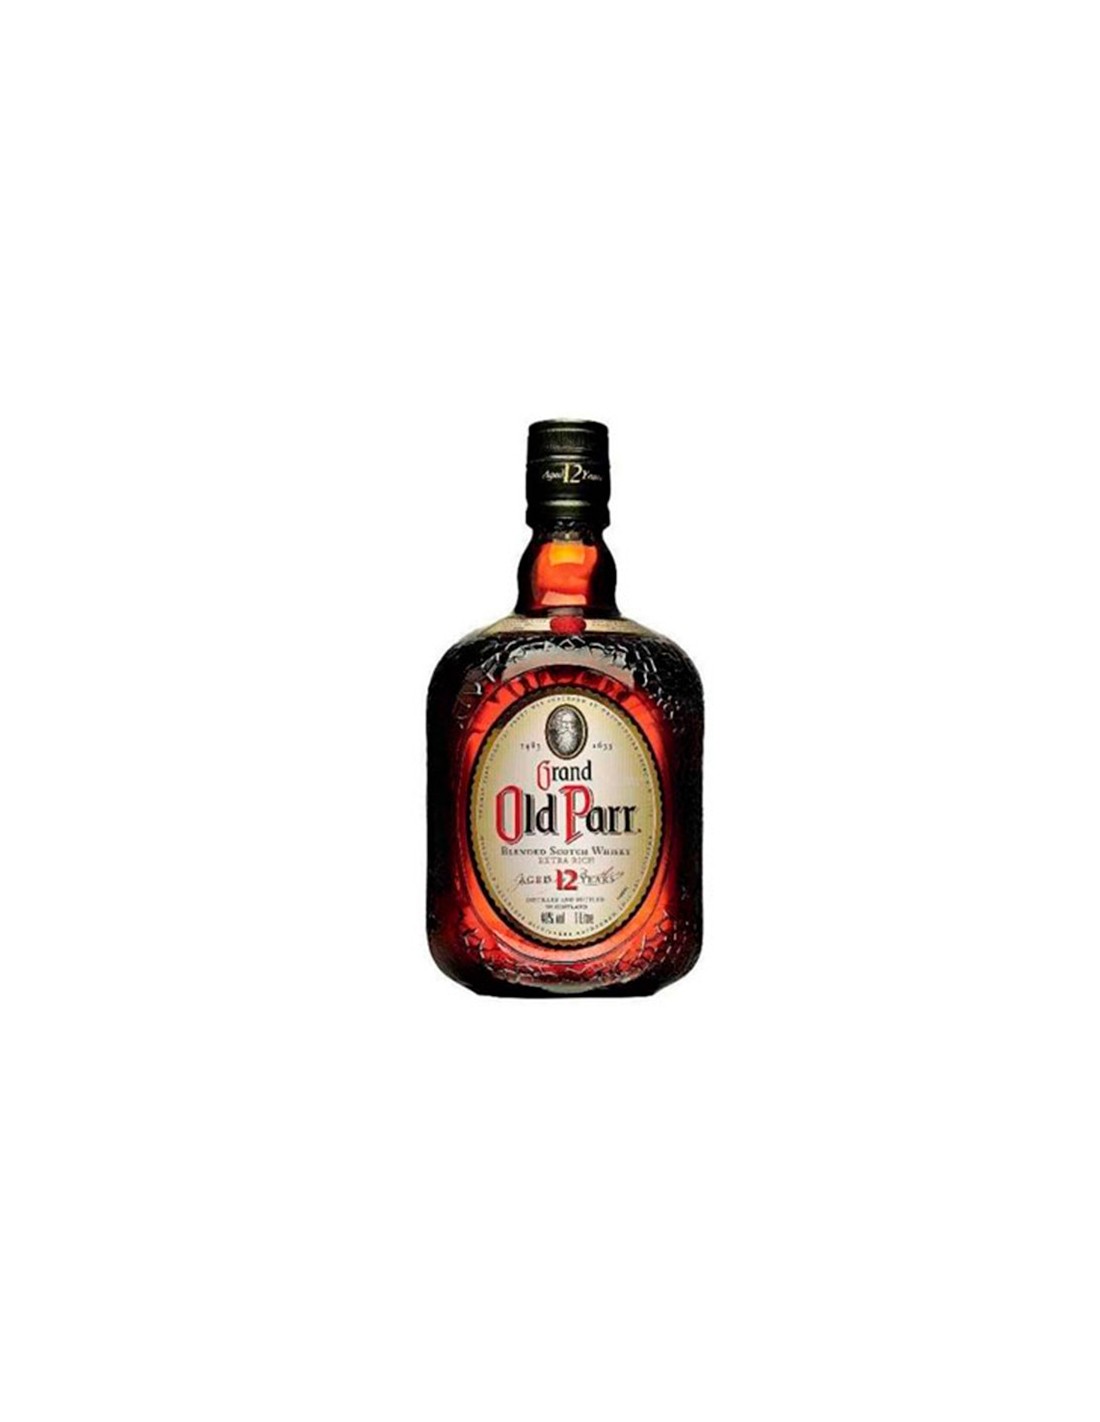 Buy Grand Old Parr 18 Year Scotch Whisky